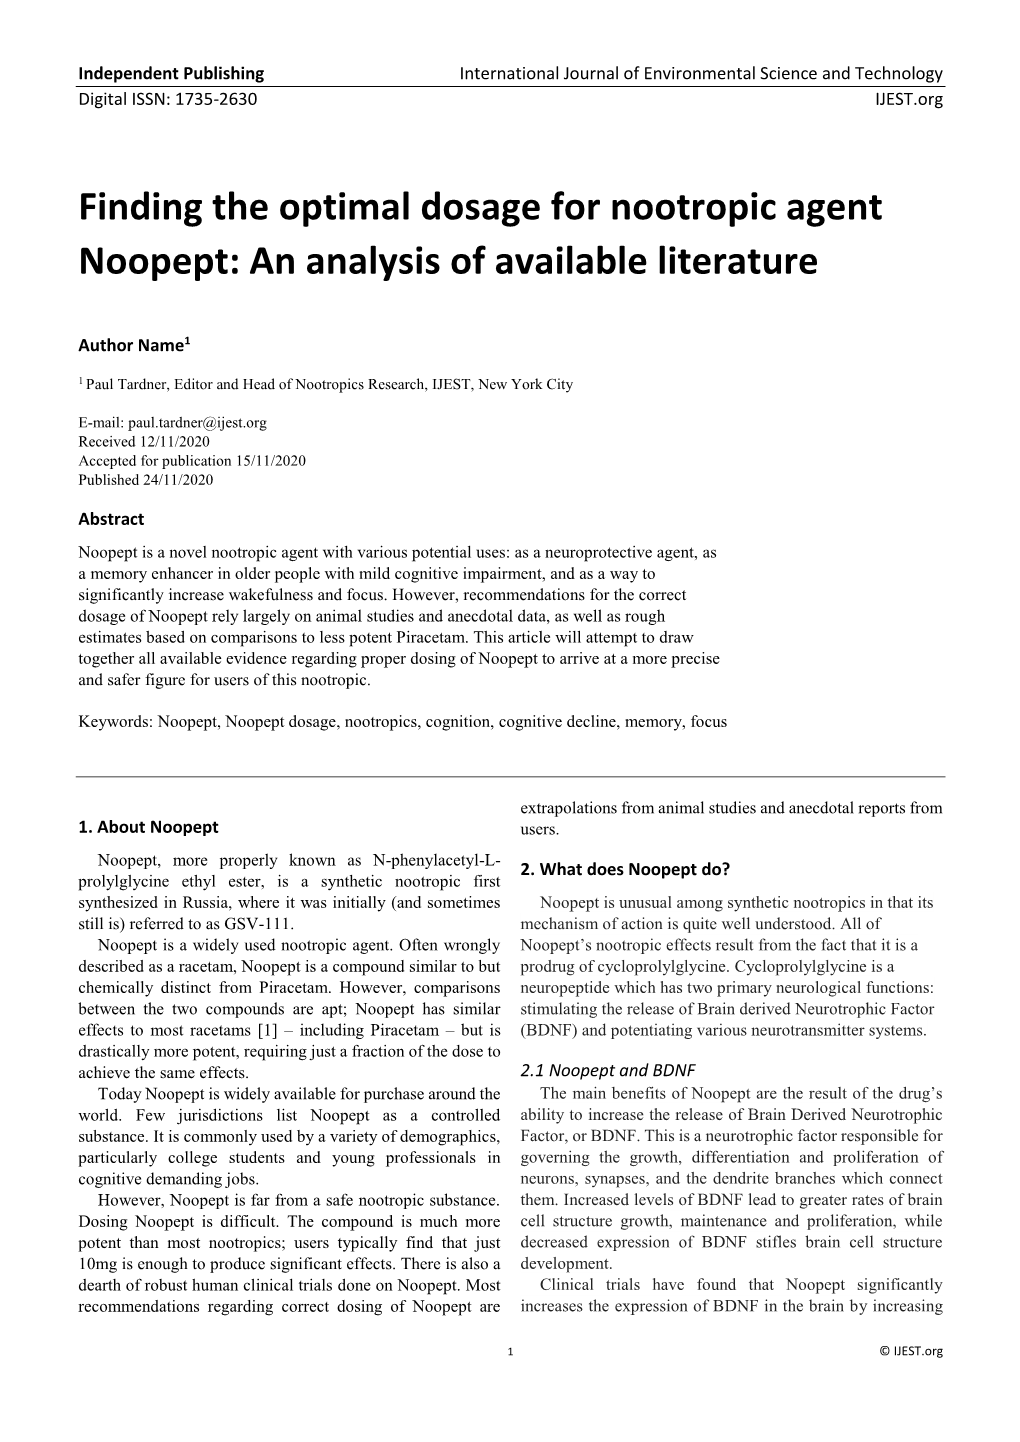 Finding the Optimal Dosage for Nootropic Agent Noopept: an Analysis of Available Literature